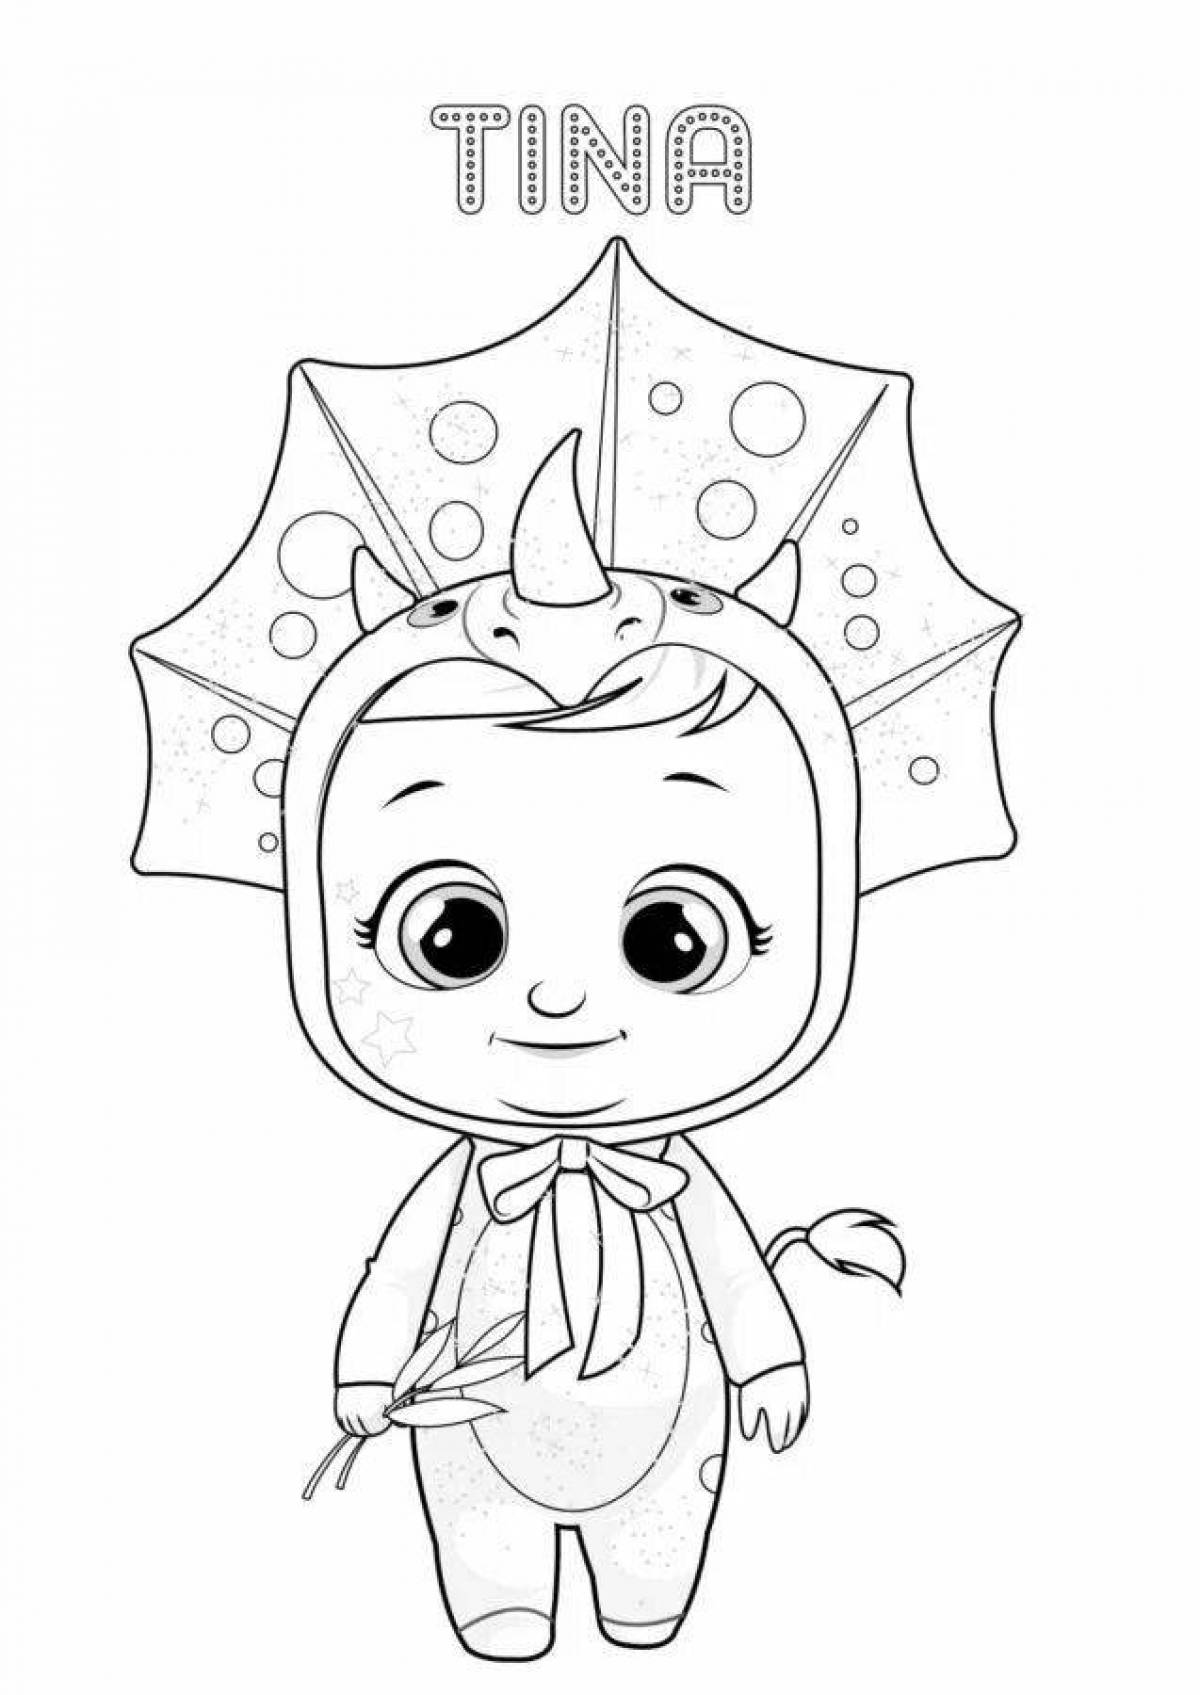 Glorious Crying Babies Coloring Page